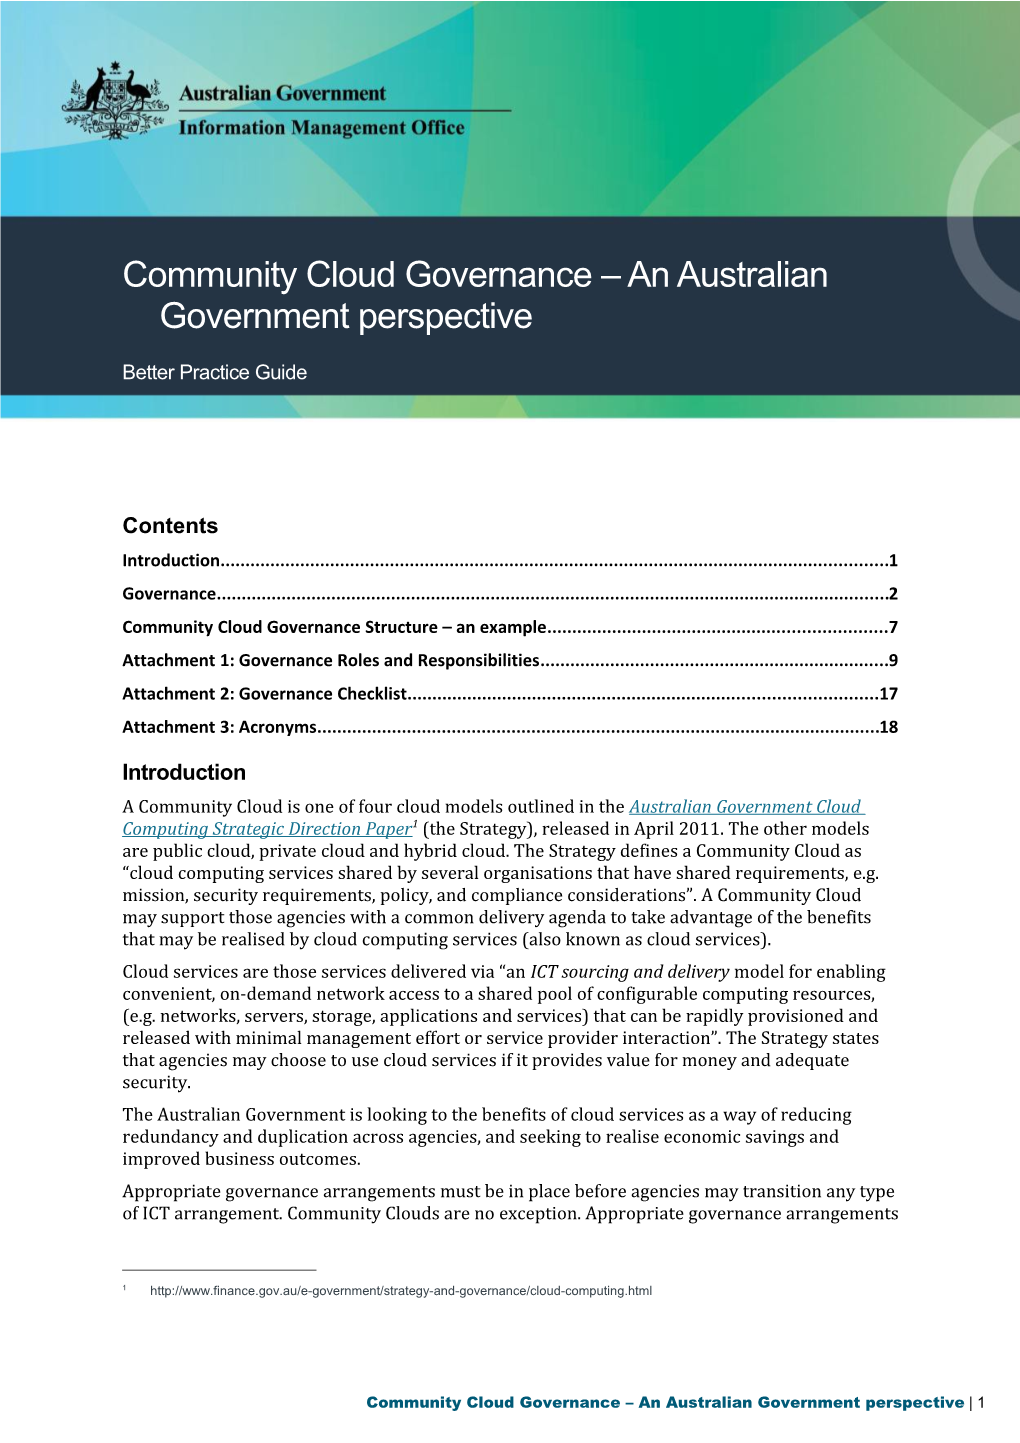 Community Cloud Governance an Australian Government Perspective